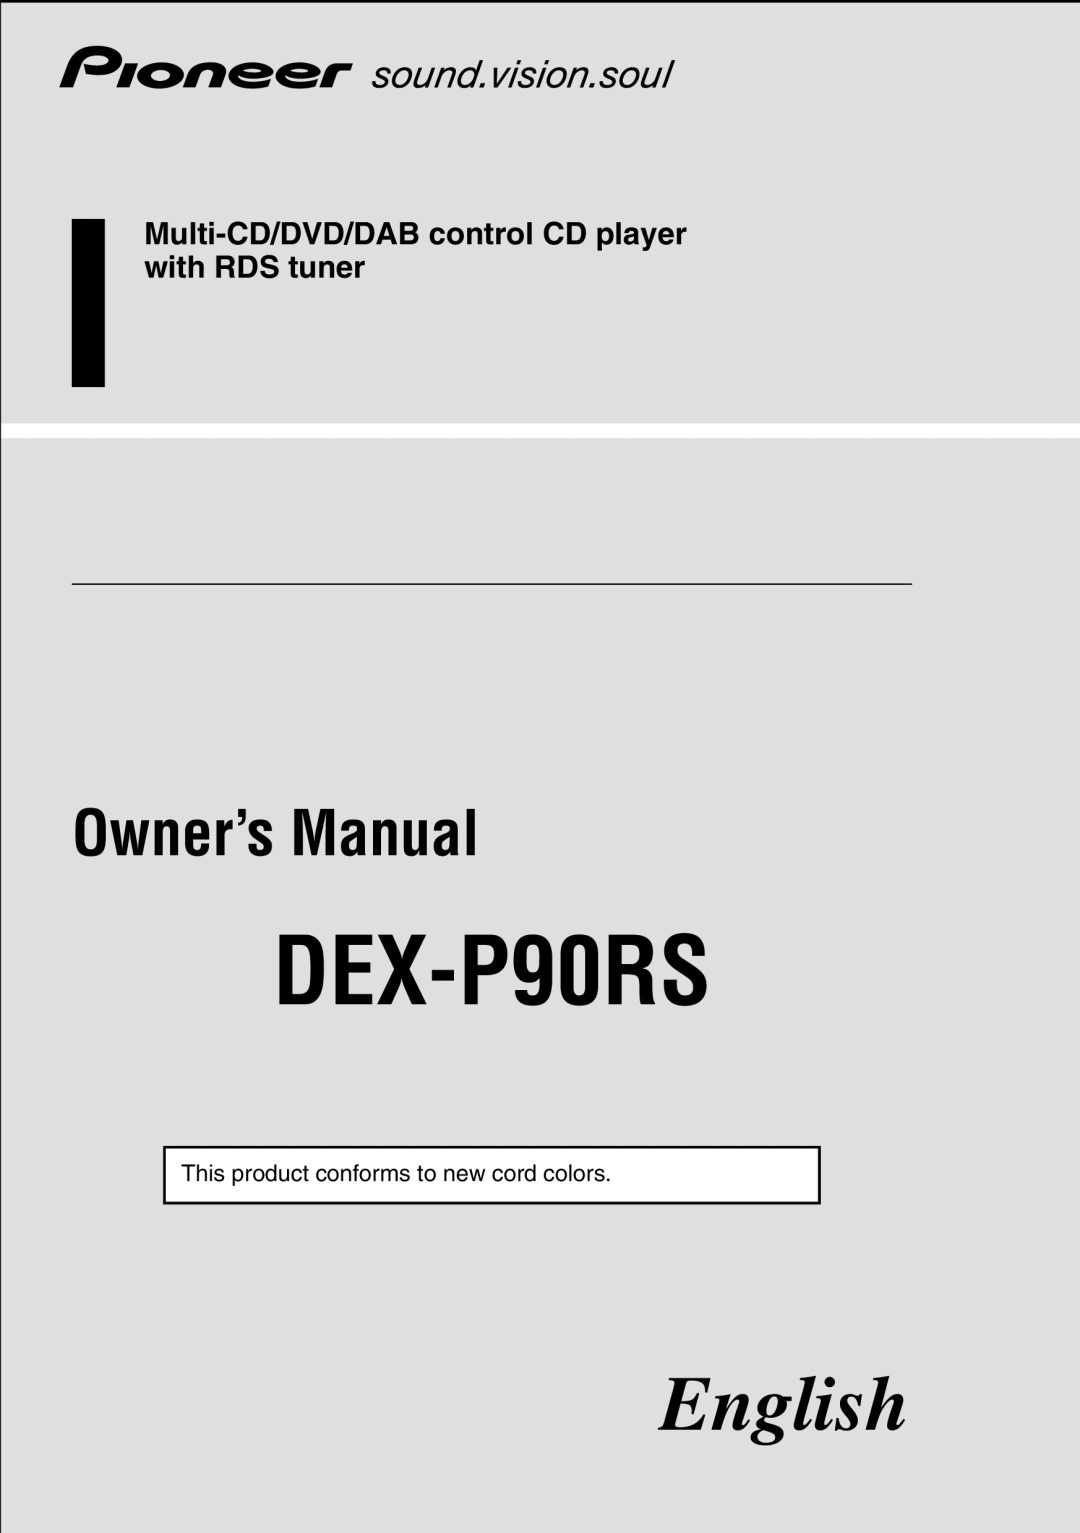 Pioneer DEX-P90RS owner manual English, Multi-CD/DVD/DABcontrol CD player with RDS tuner 